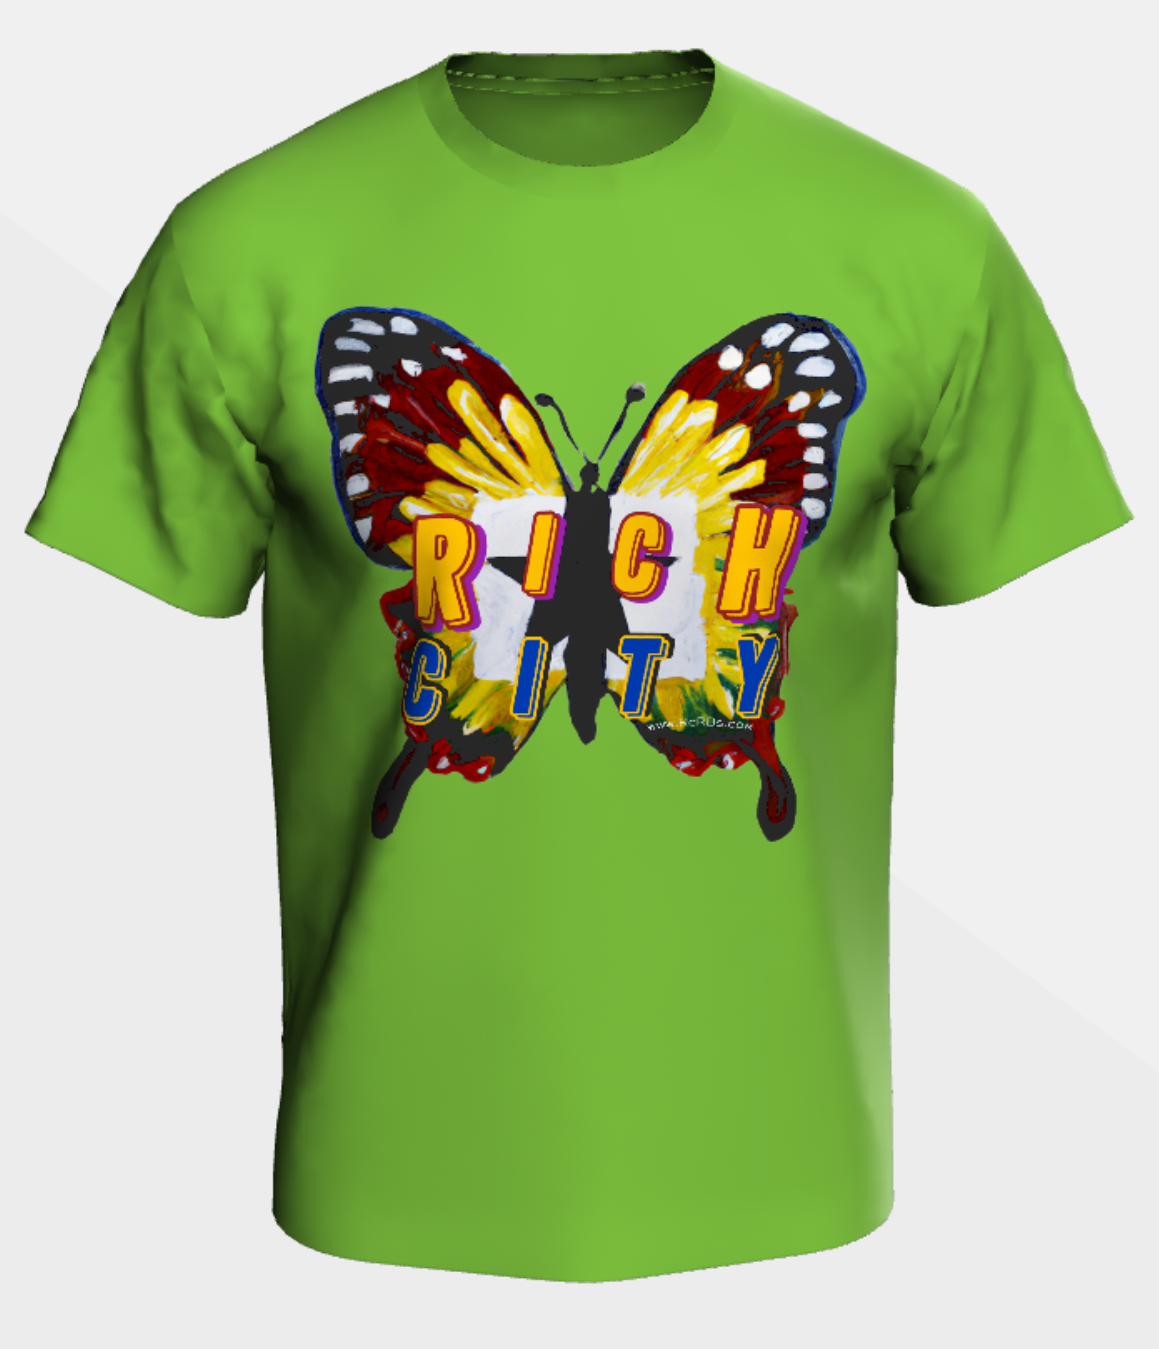 New 2023 RichCity Rides Bike/Skate Cooperative -"The Butterfly Effect"- #3 Sustainable Clothing Collection